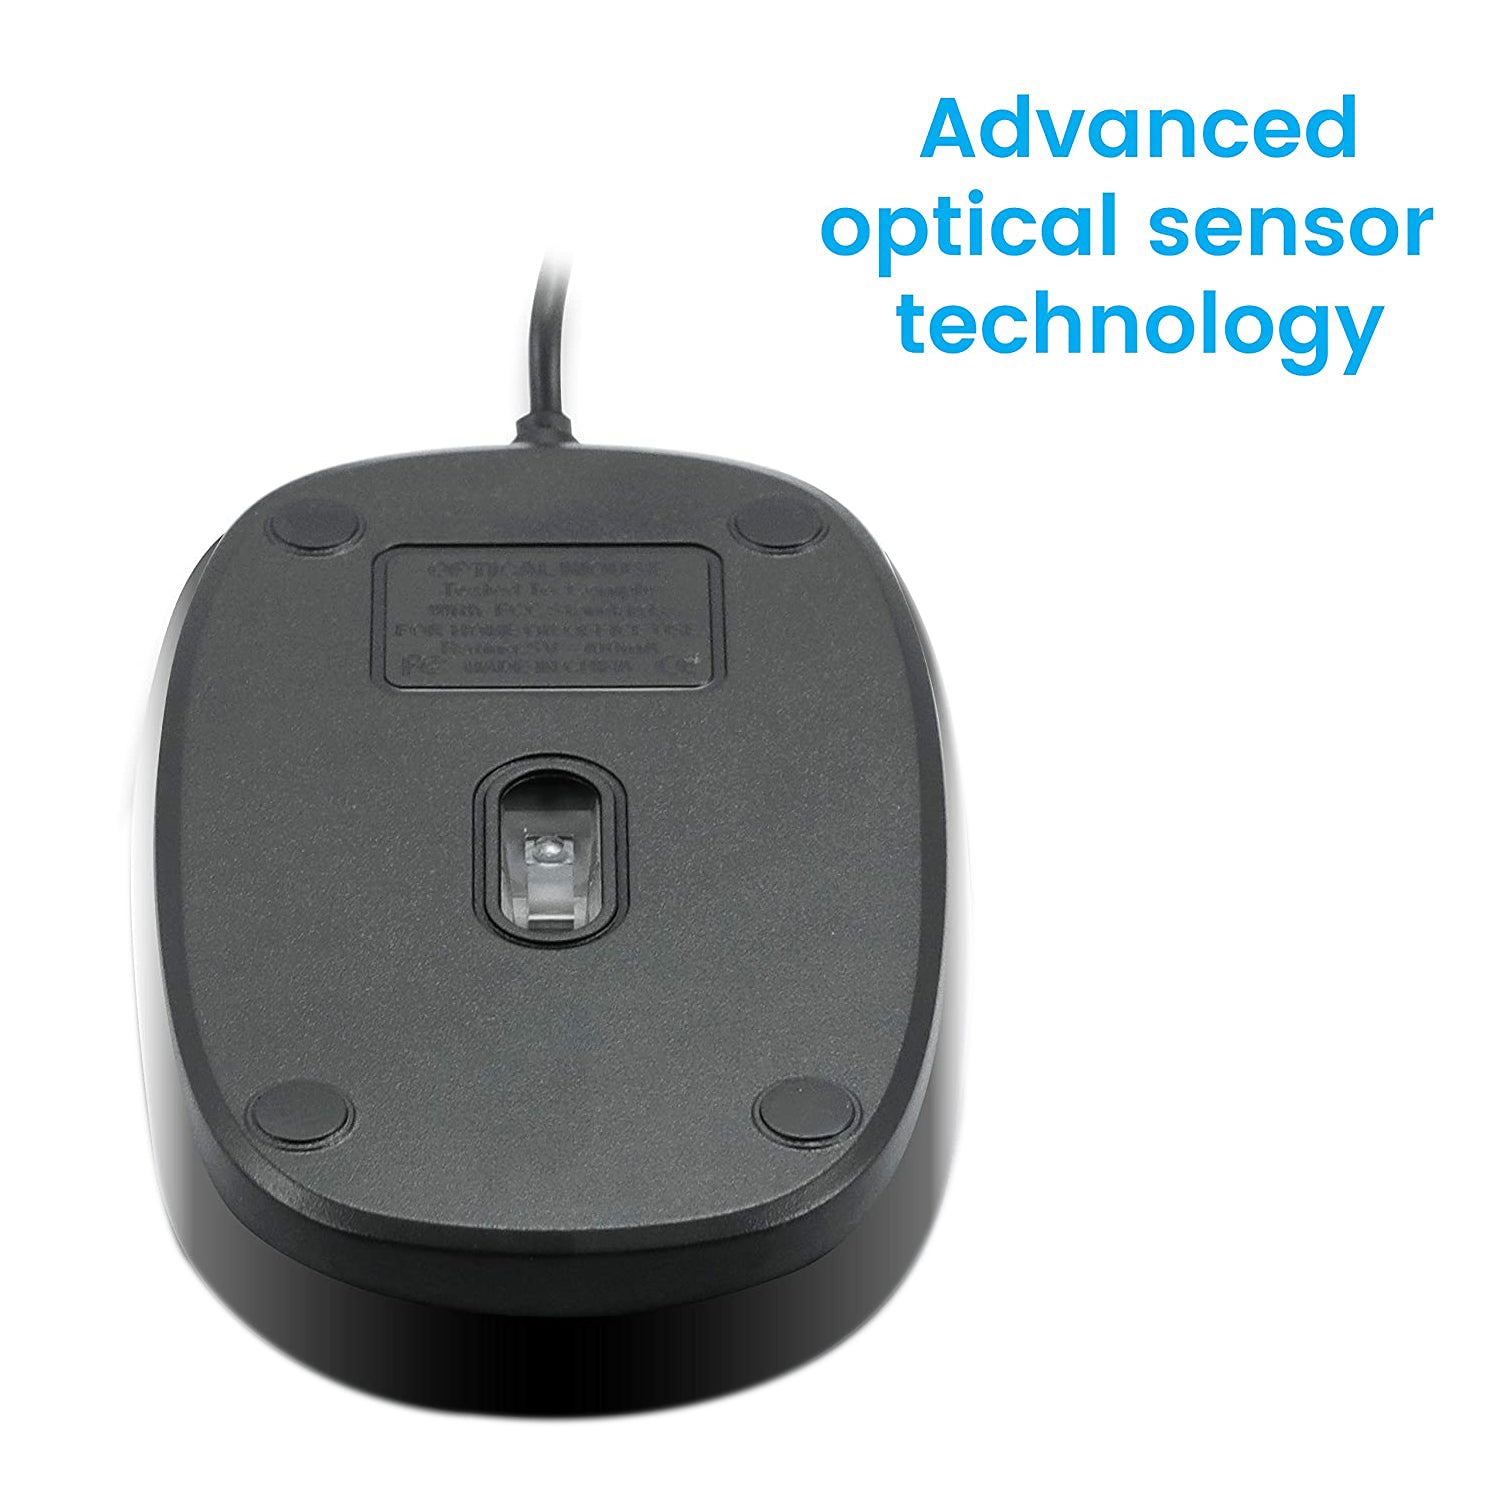 1422 Wired Mouse for Laptop and Desktop Computer PC With Faster Response Time (Black) 